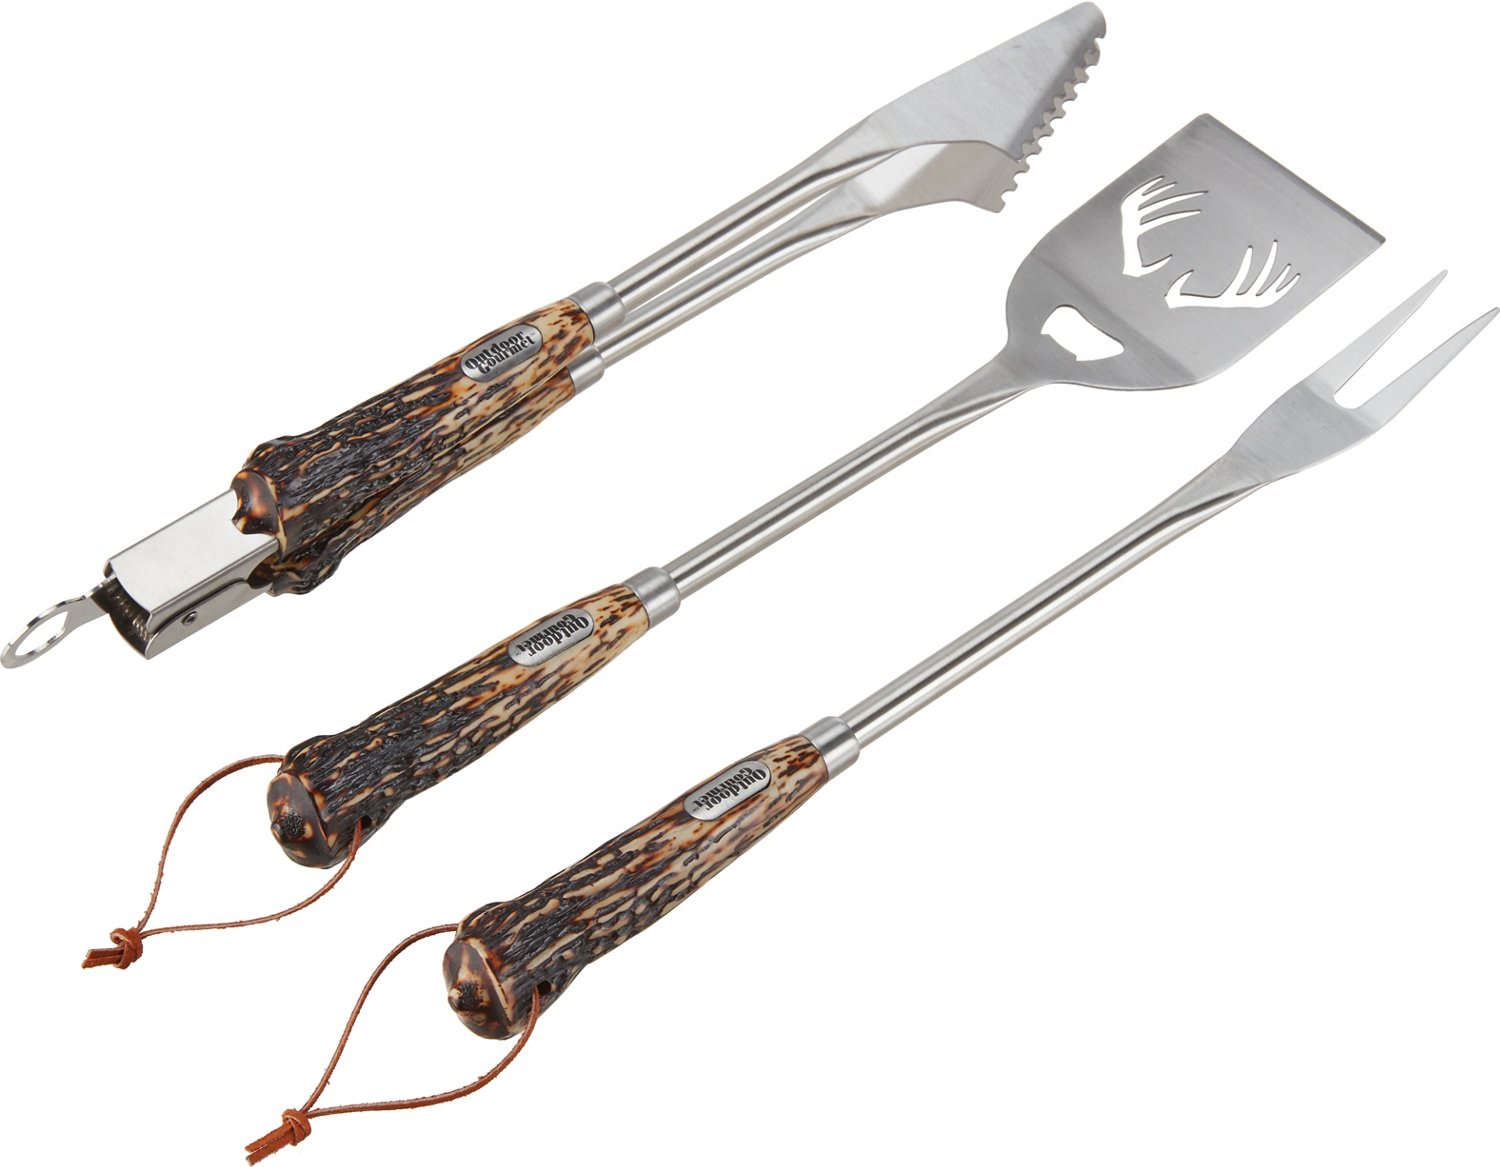 Antler Handle Grilling Set for BBQ Outdoors Style 3 Piece Cooking Set for  BBQ and Grill